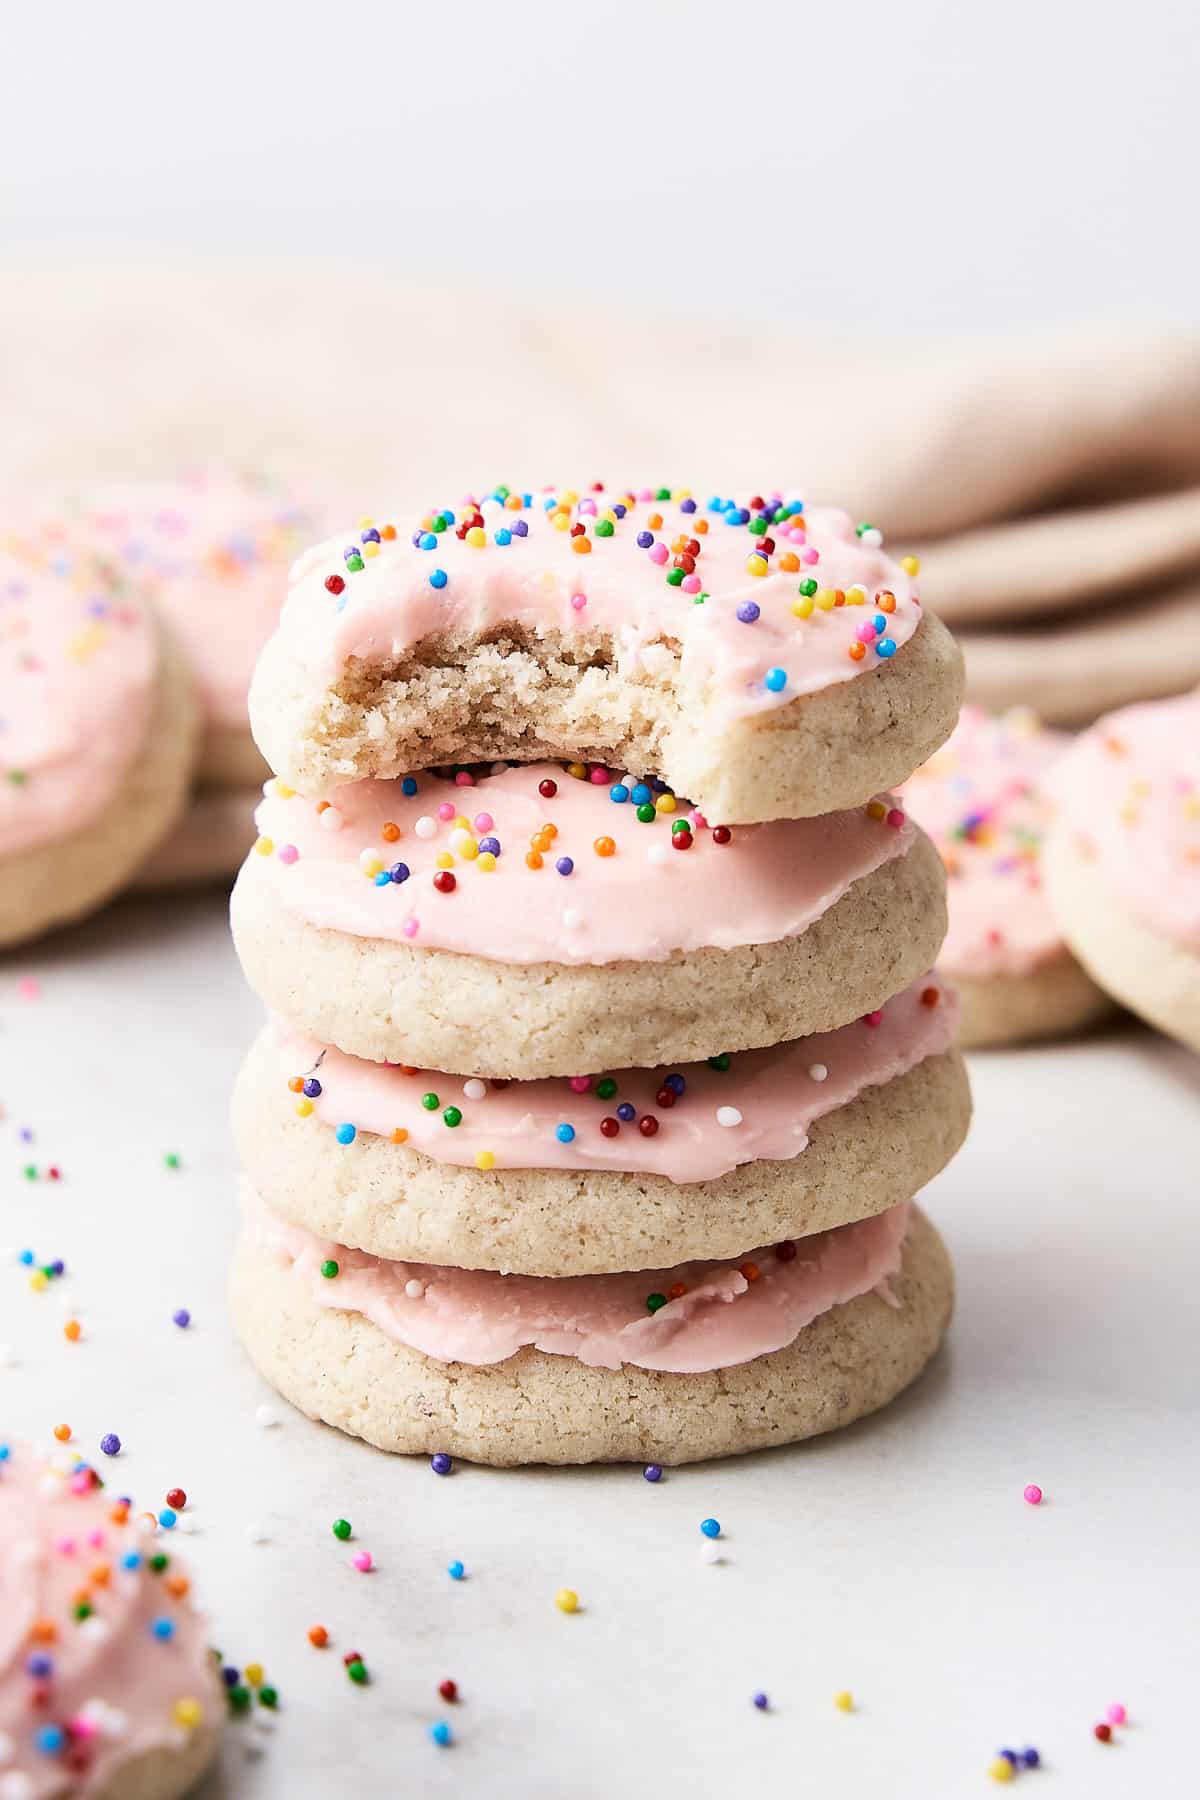 A stack of gluten free sugar cookies with a bite taken out of the top cookie.